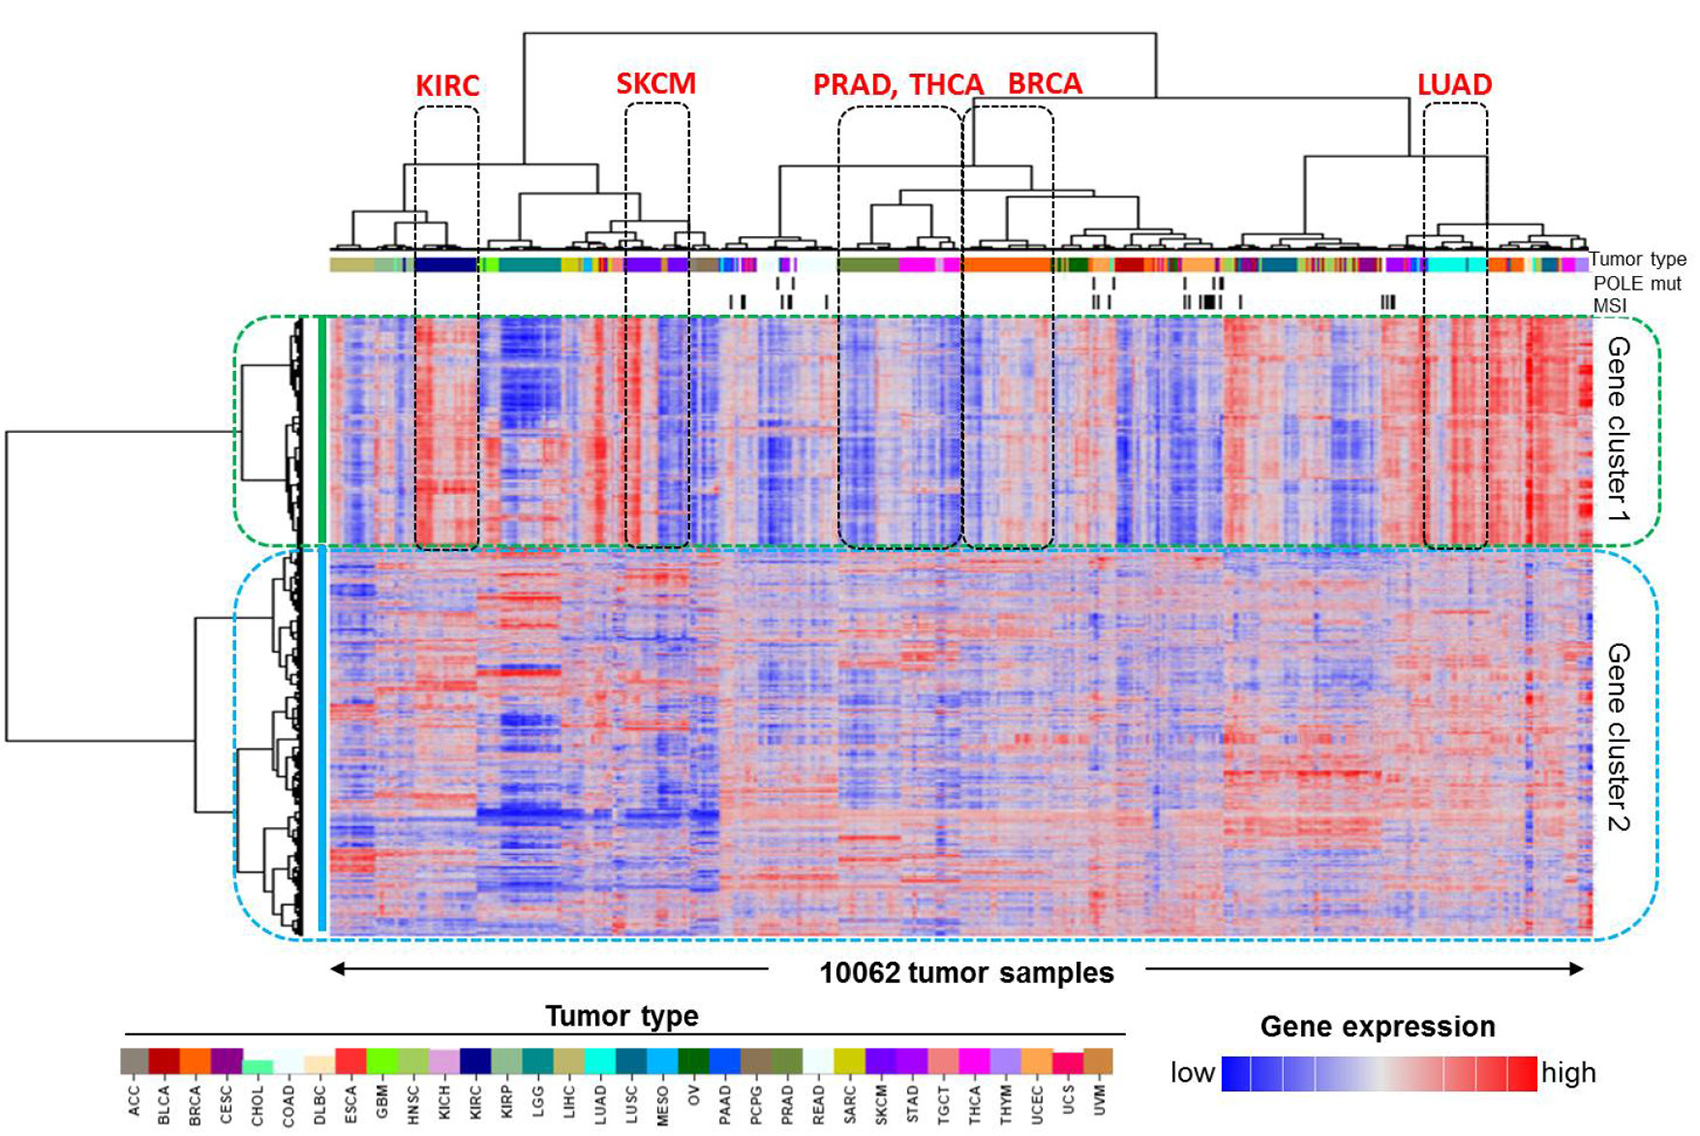 Identification of the pan-cancer immune gene expression signature in human cancer.